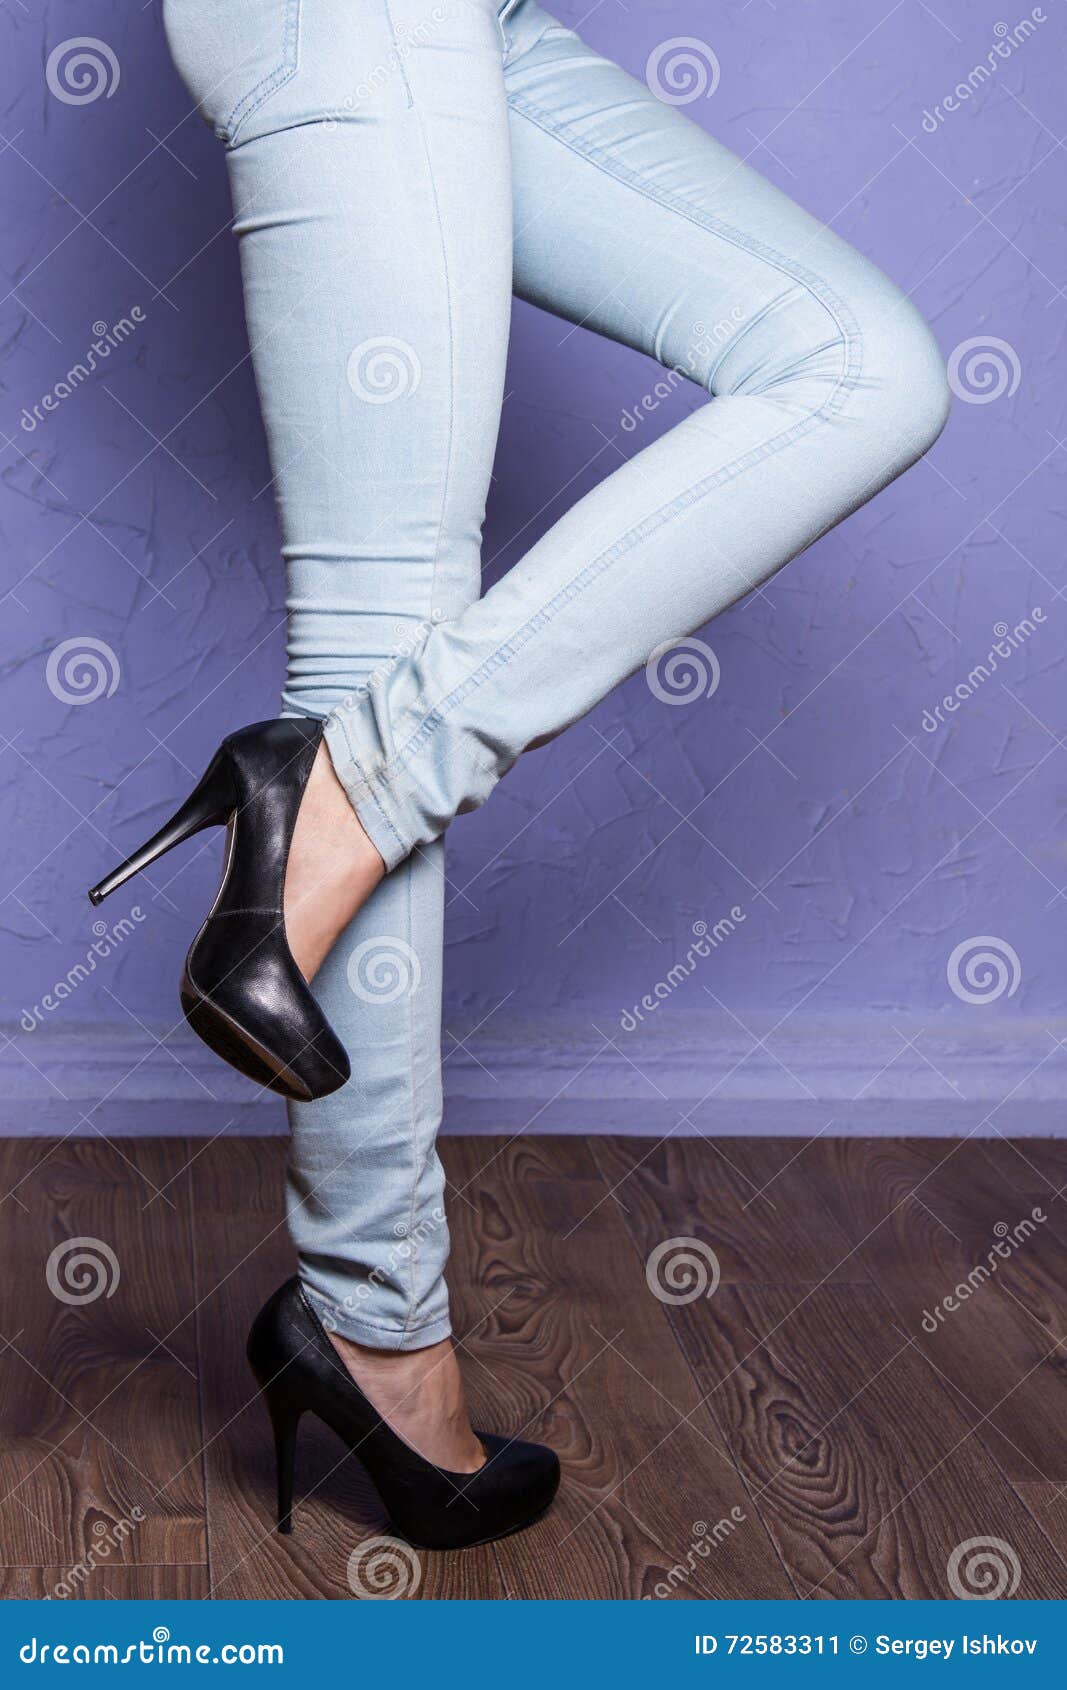 Leggy Girl in Black Shoes with High Heels Stock Image - Image of high ...